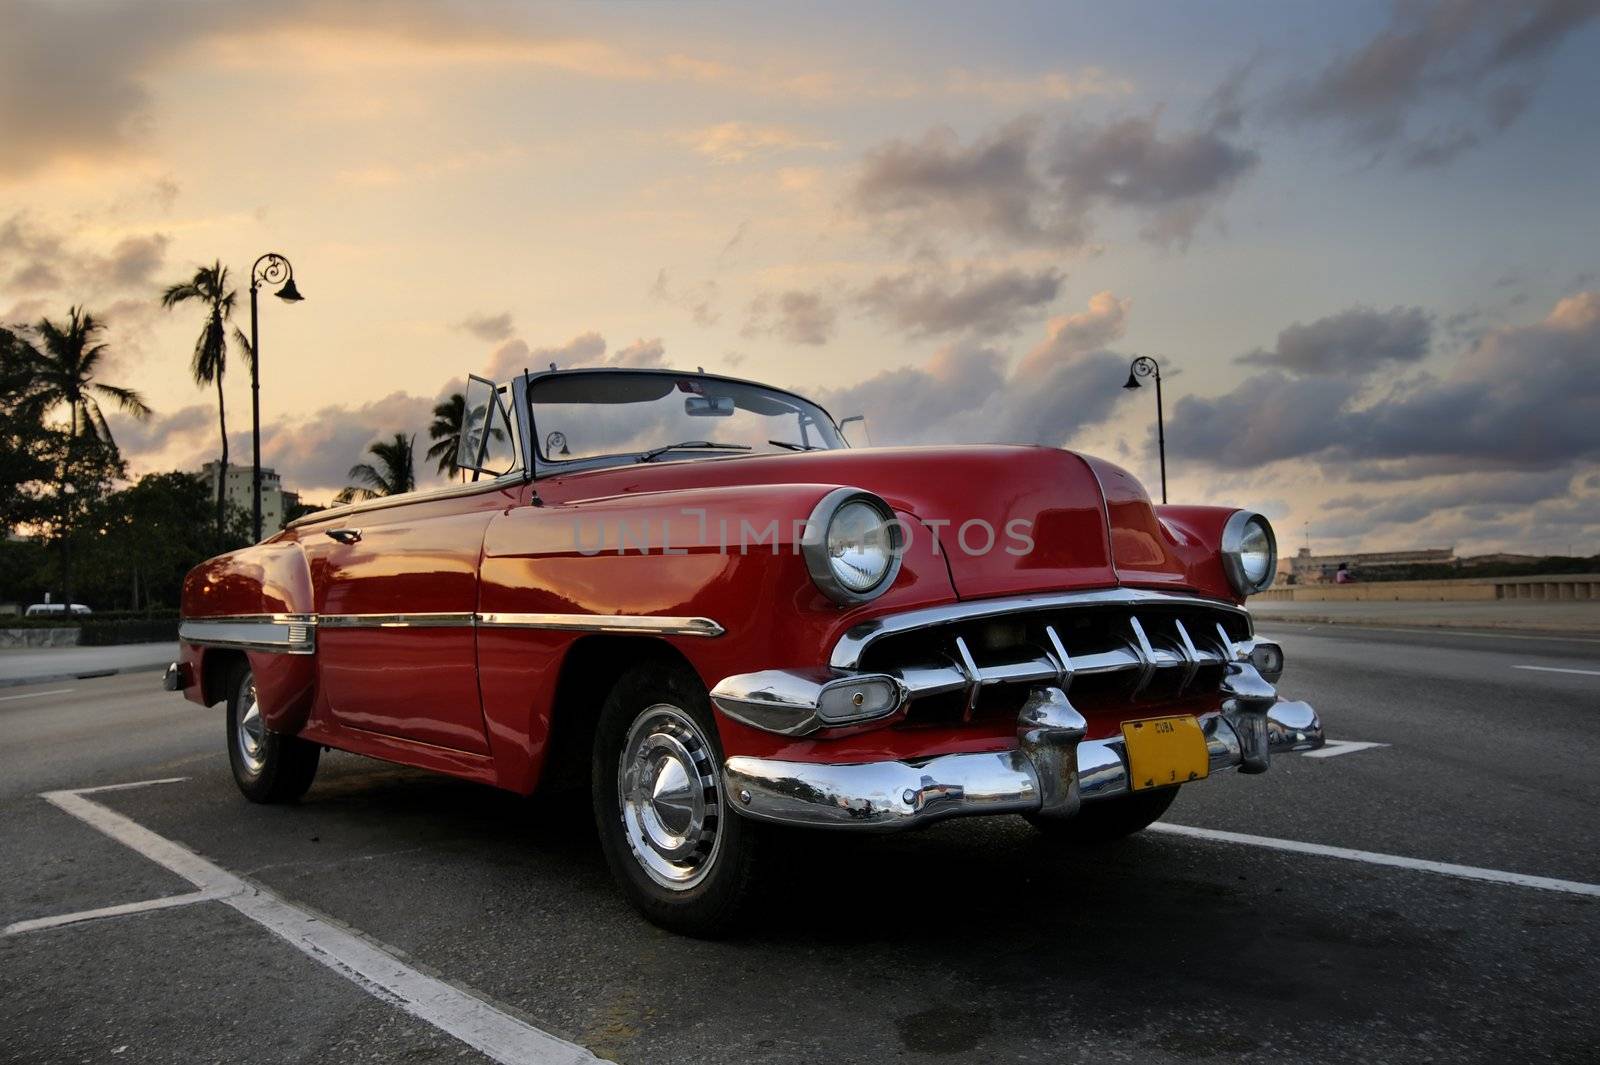 Red car in Havana sunset by rgbspace